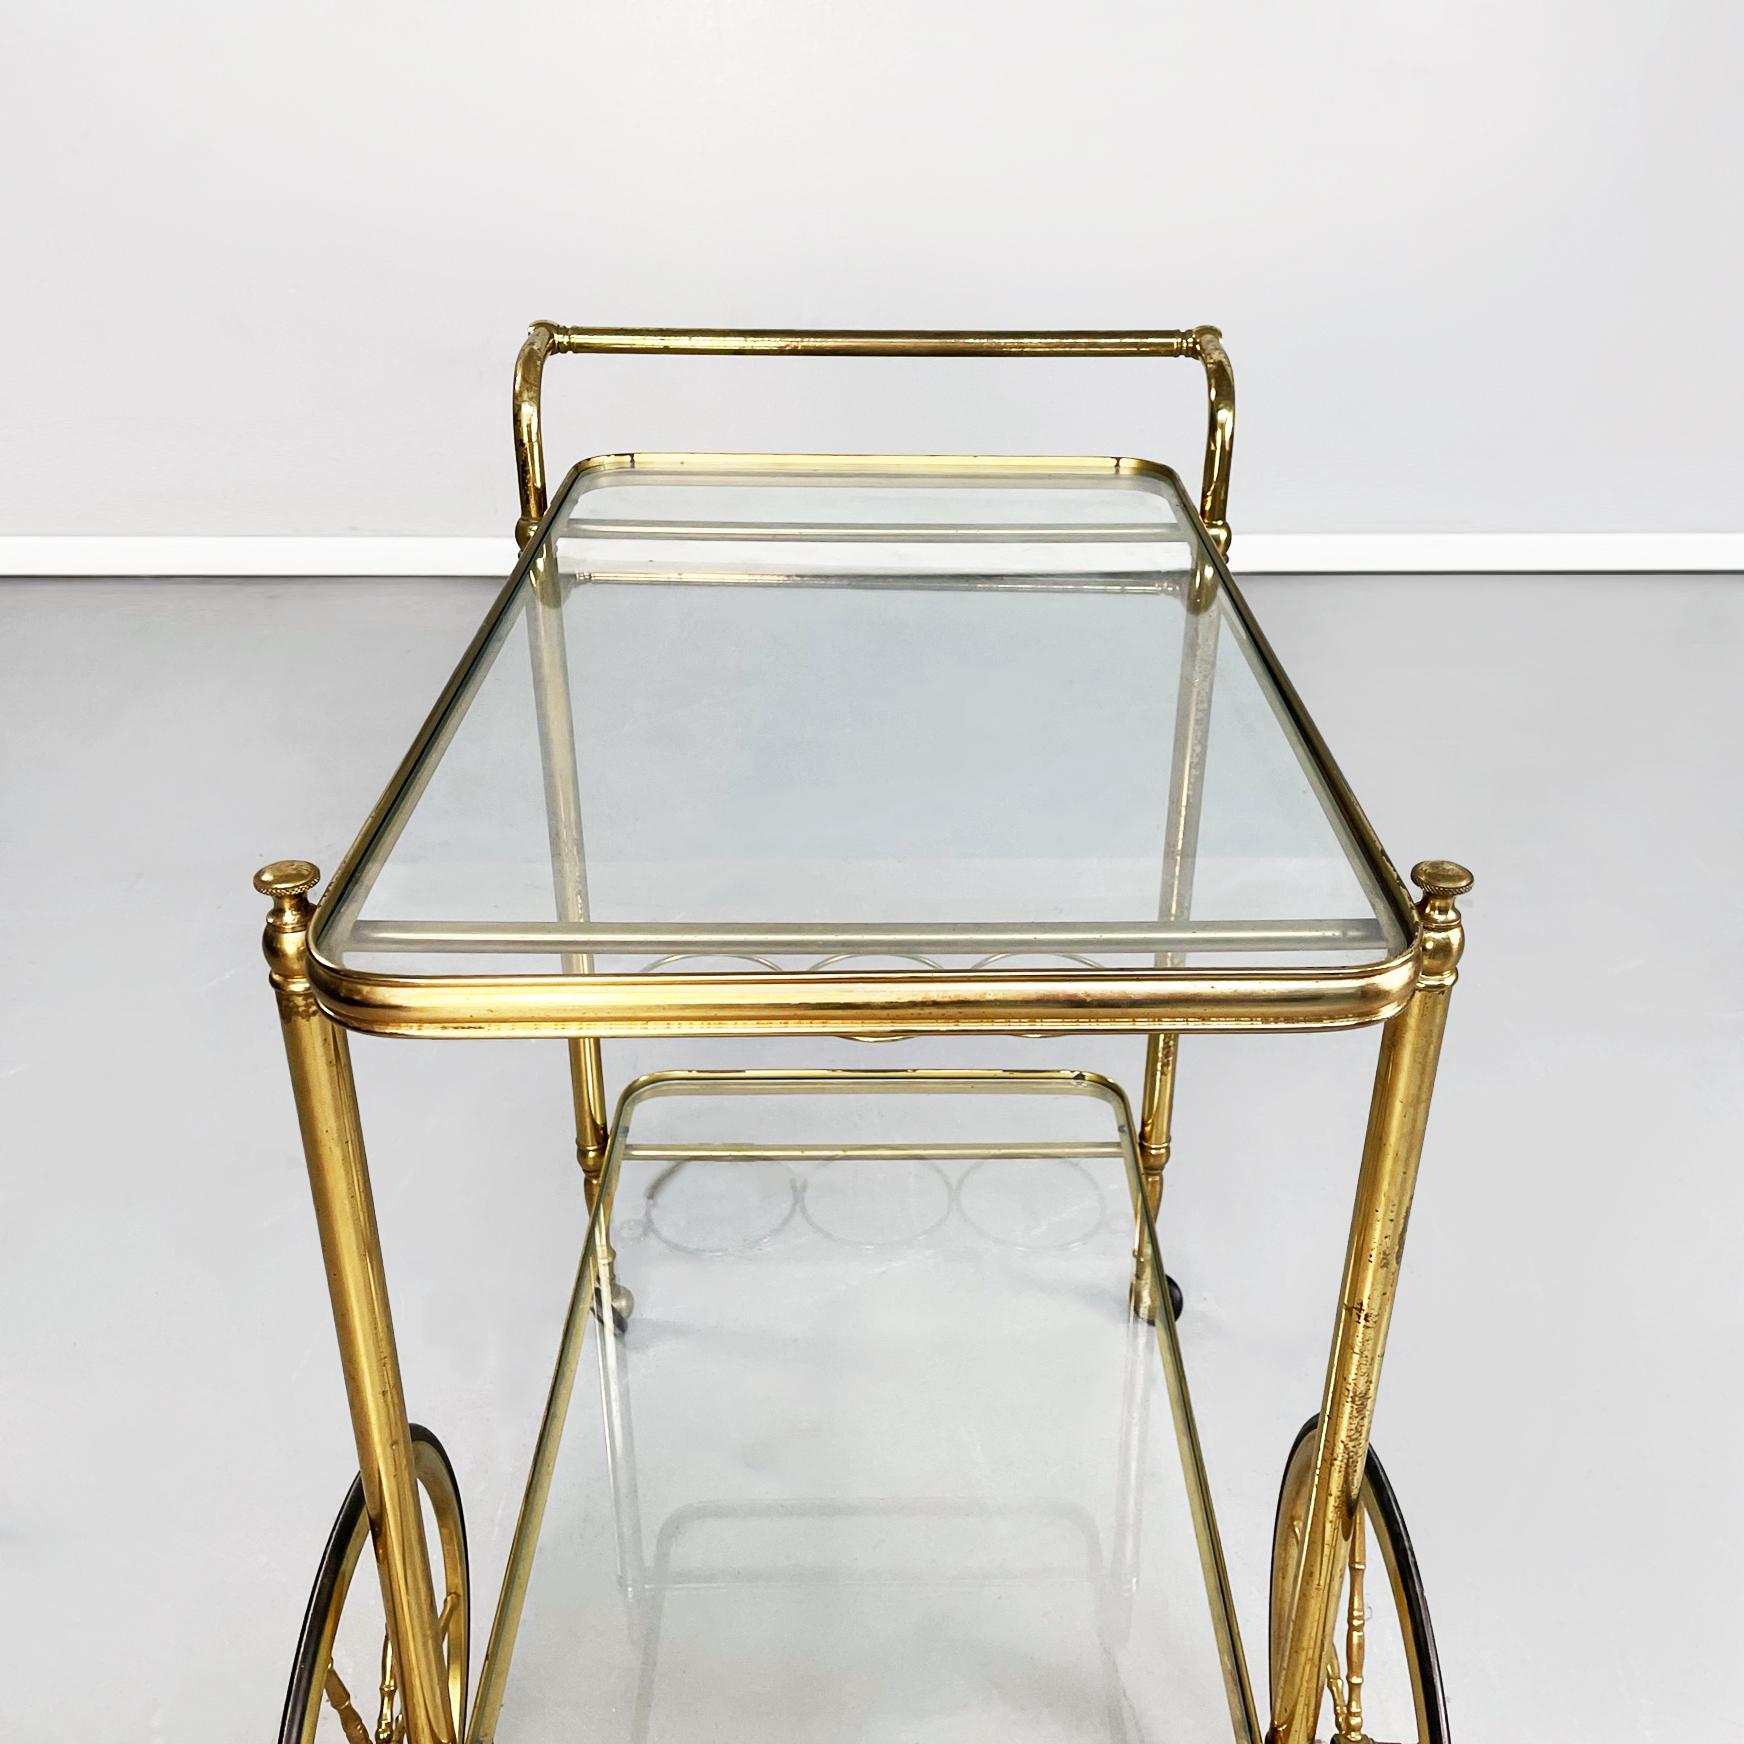 Italian Mid-Century Modern Bar Cart in Brass and Glass, 1950s In Good Condition For Sale In MIlano, IT